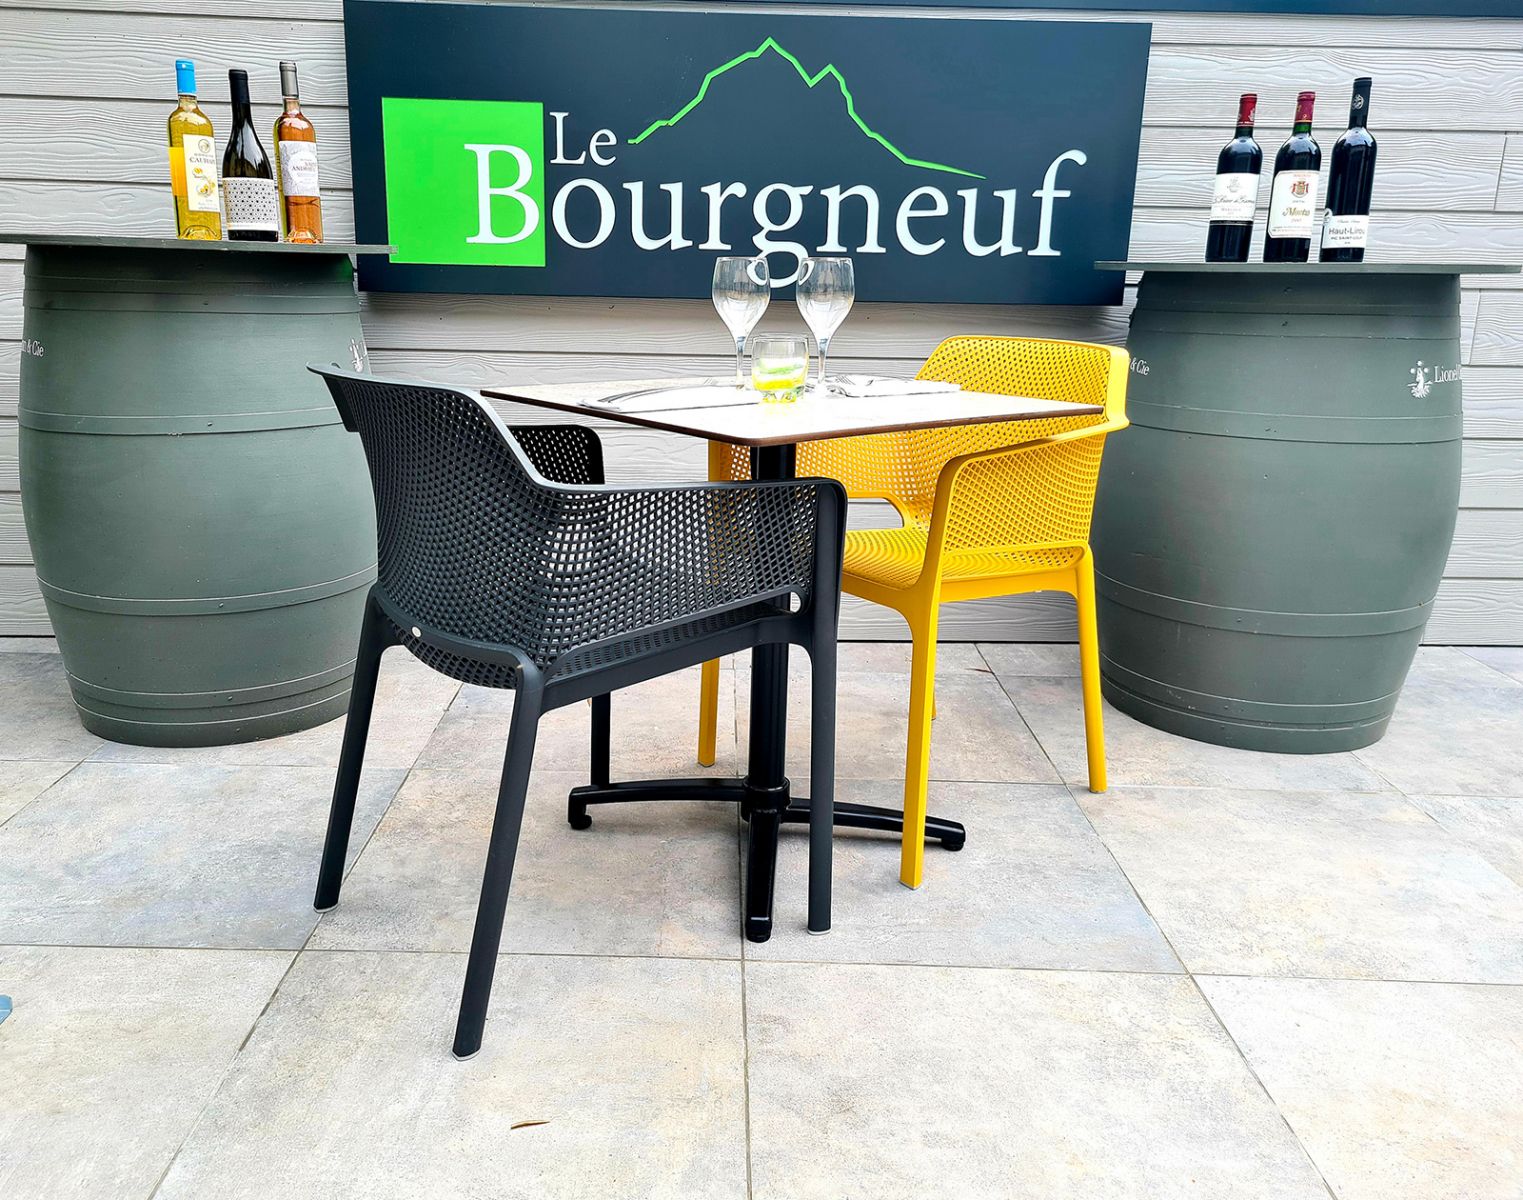 Le Bourgneuf